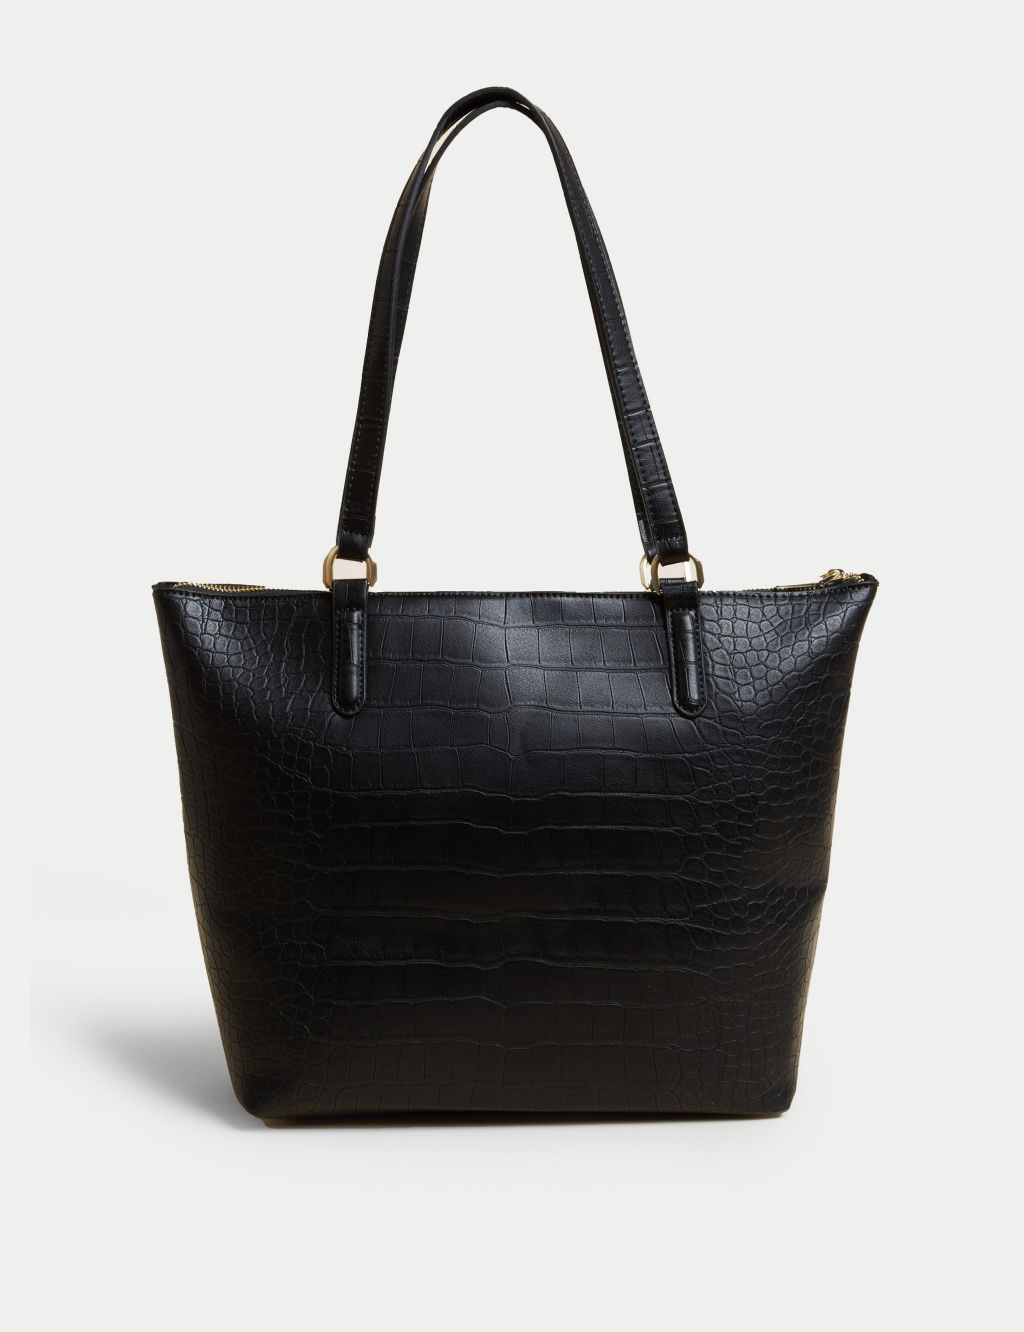 Faux Leather Croc Effect Tote Bag image 1